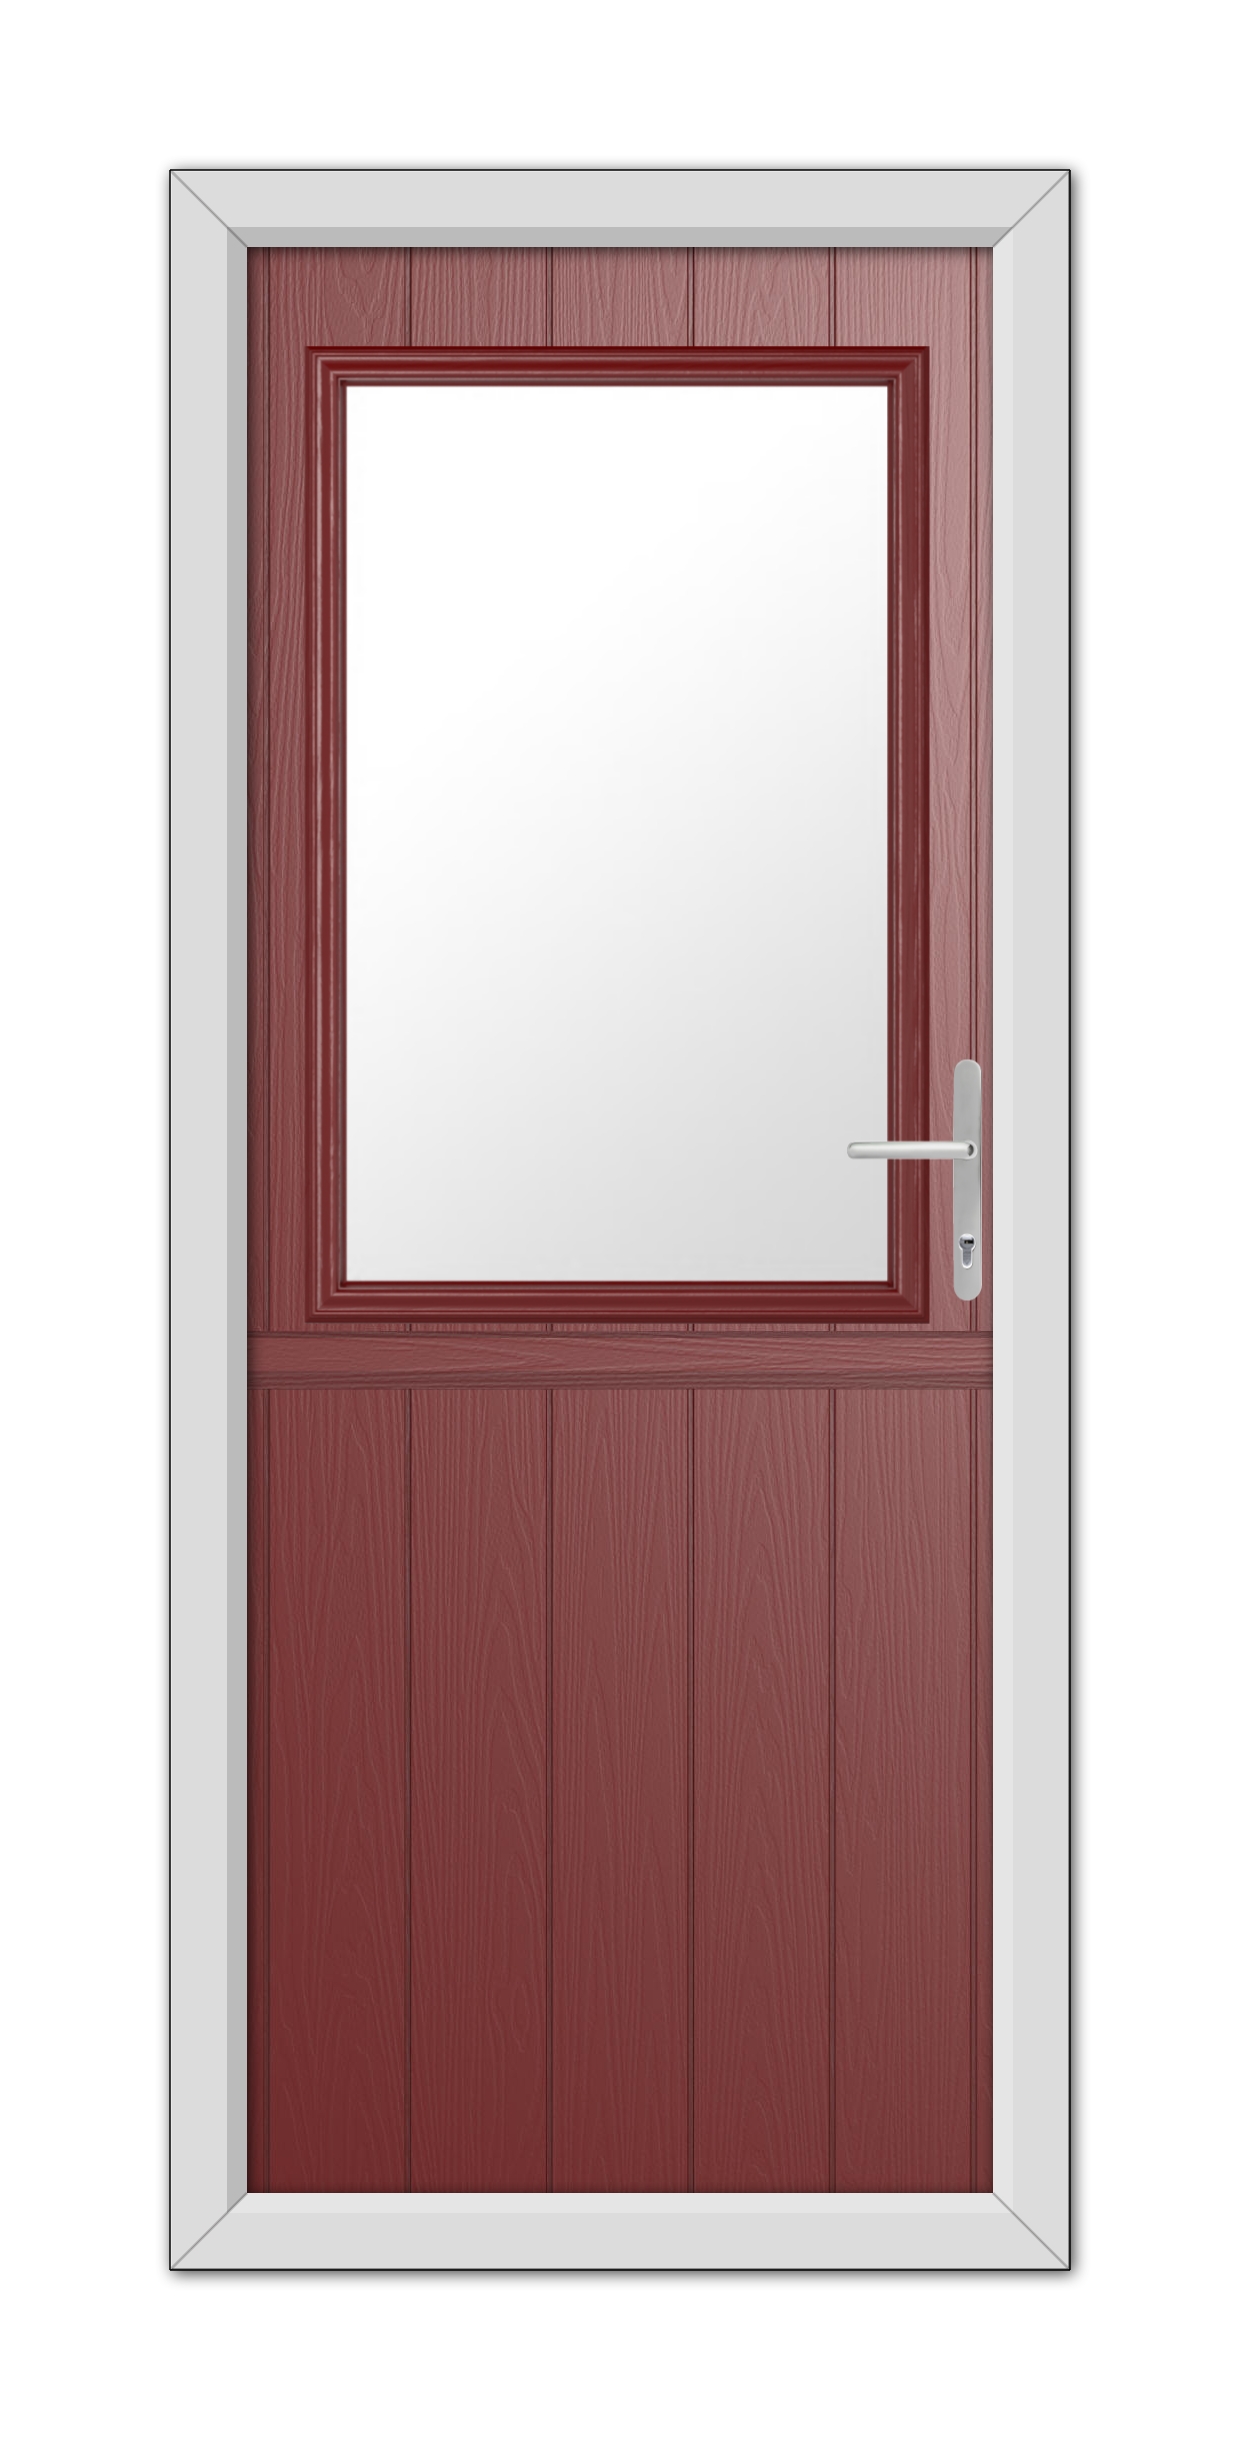 A modern Red Clifton Stable Composite Door 48mm Timber Core with a large glass panel on top, a solid wood lower half, and a white metal handle, set in a white frame.